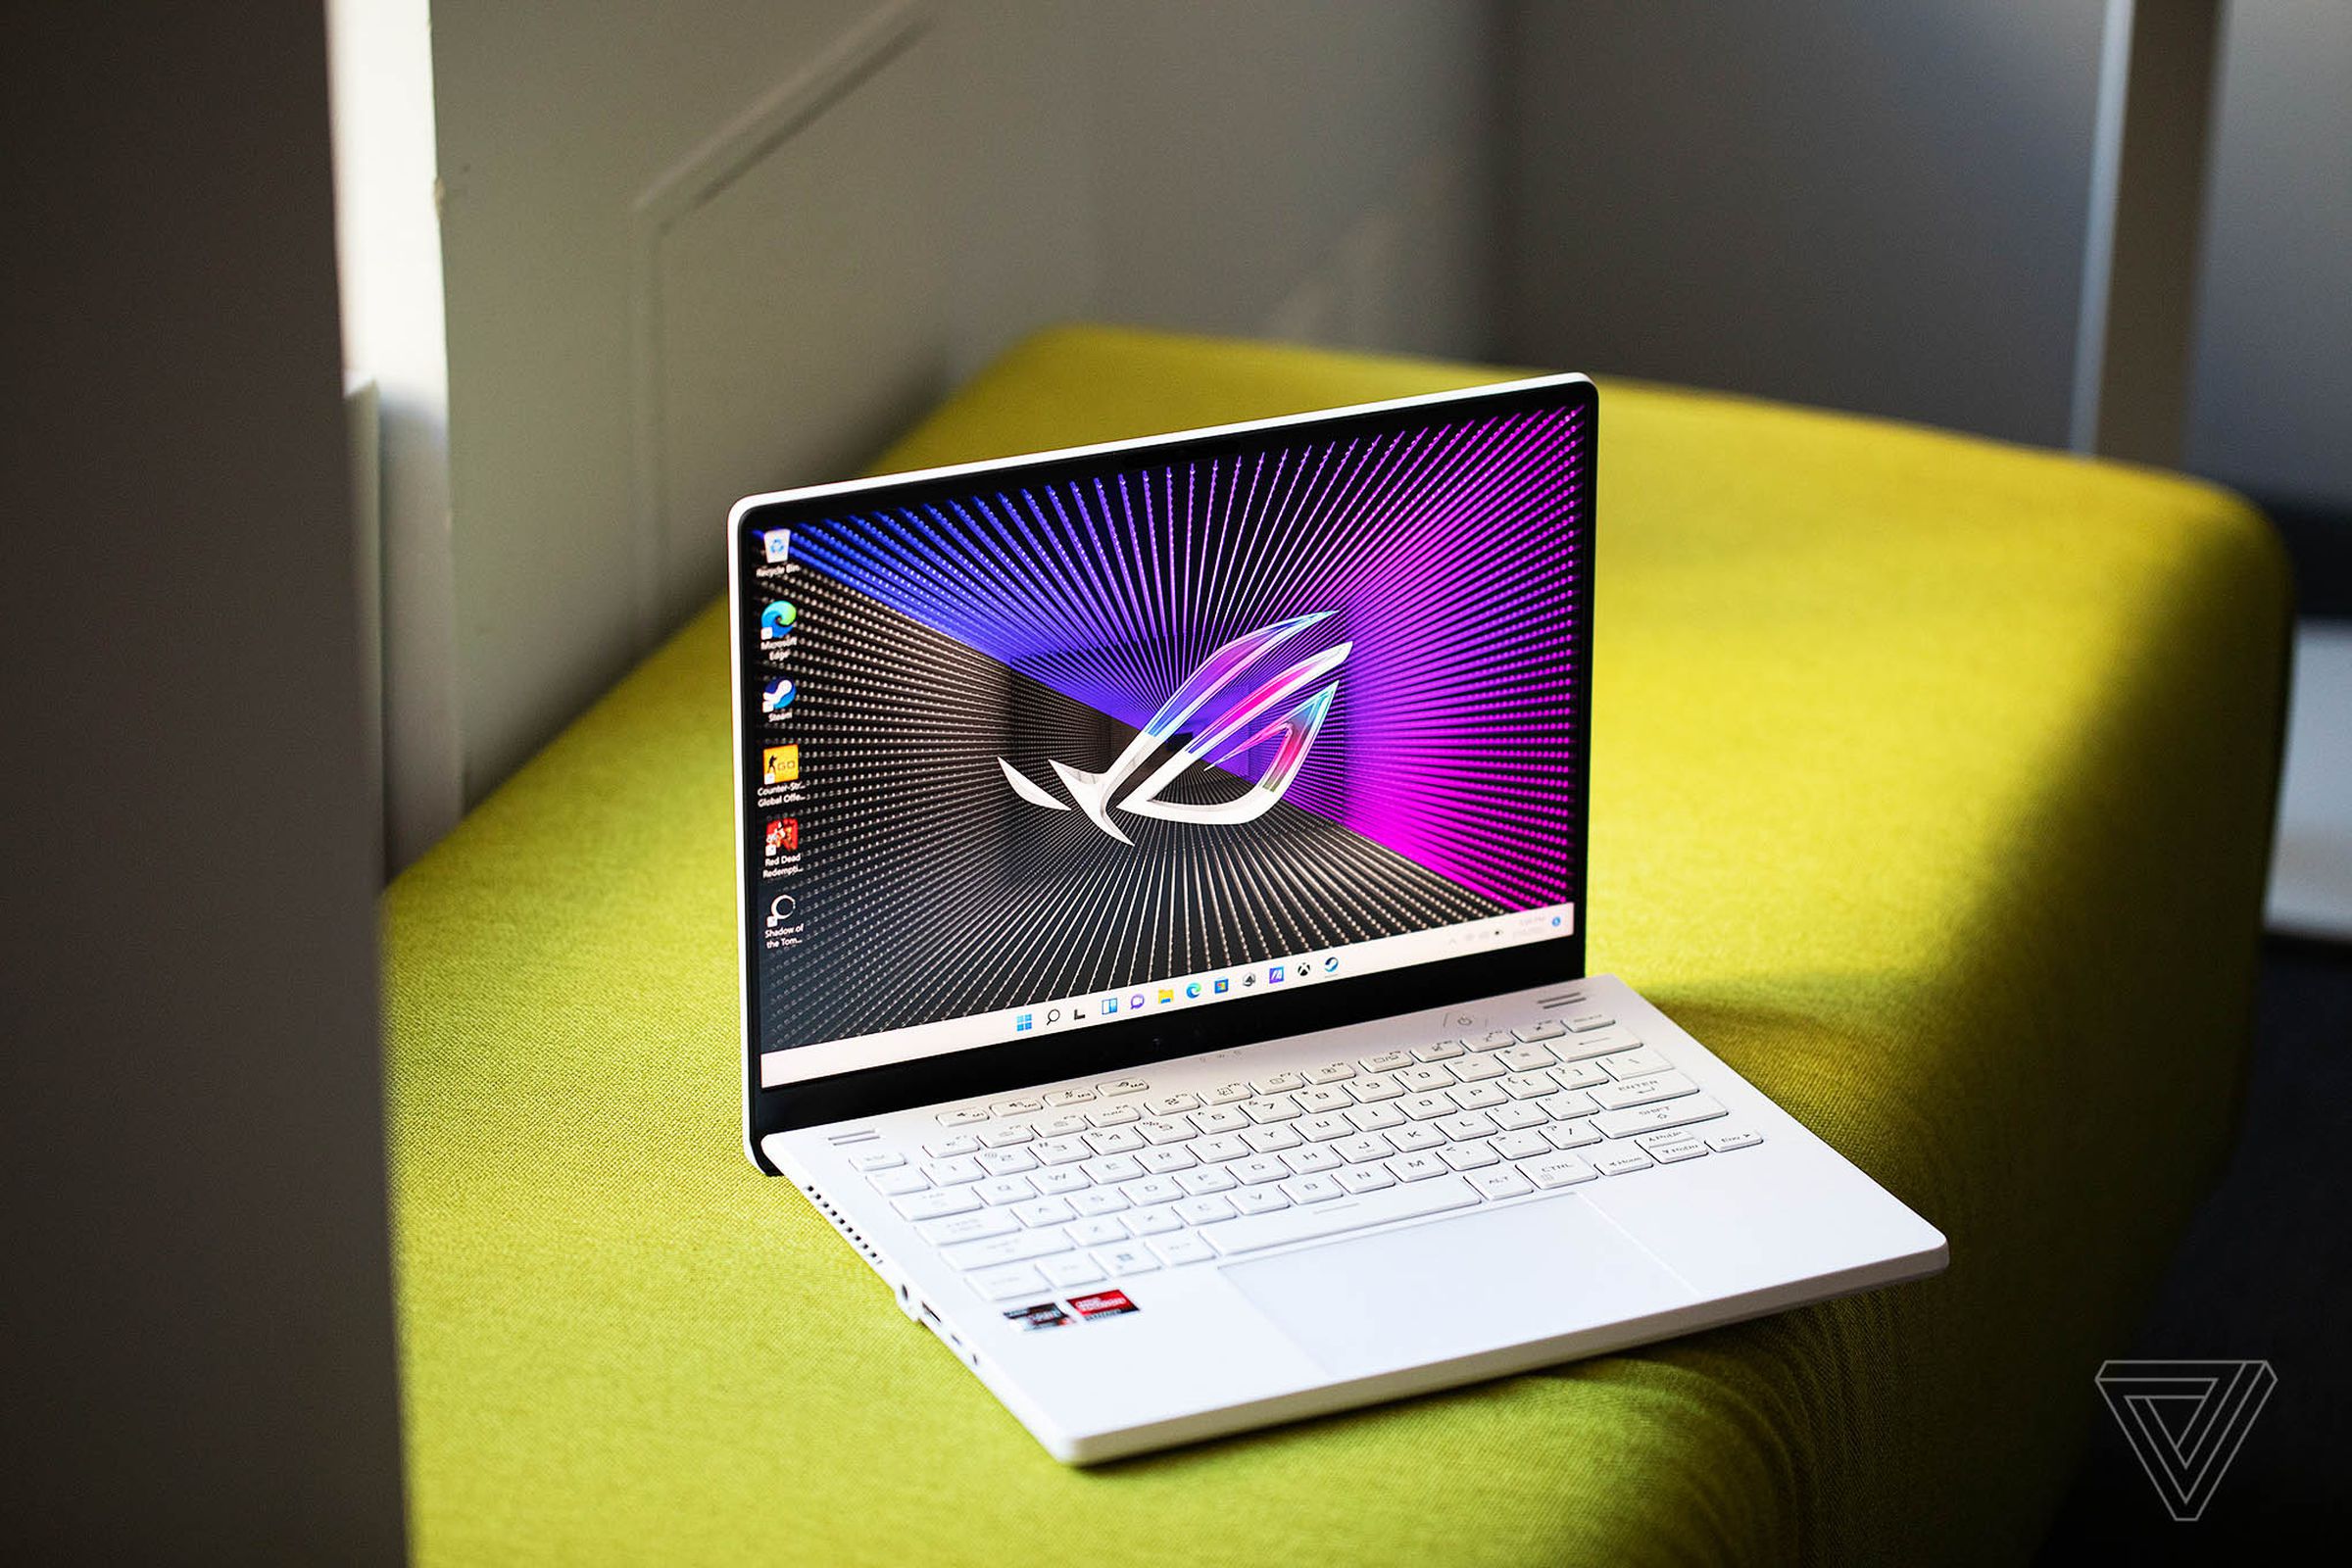 The Asus ROG Zephyrus G14 on a green bench open angled slightly to the right. The screen displays a black and purple background with the ROG logo.